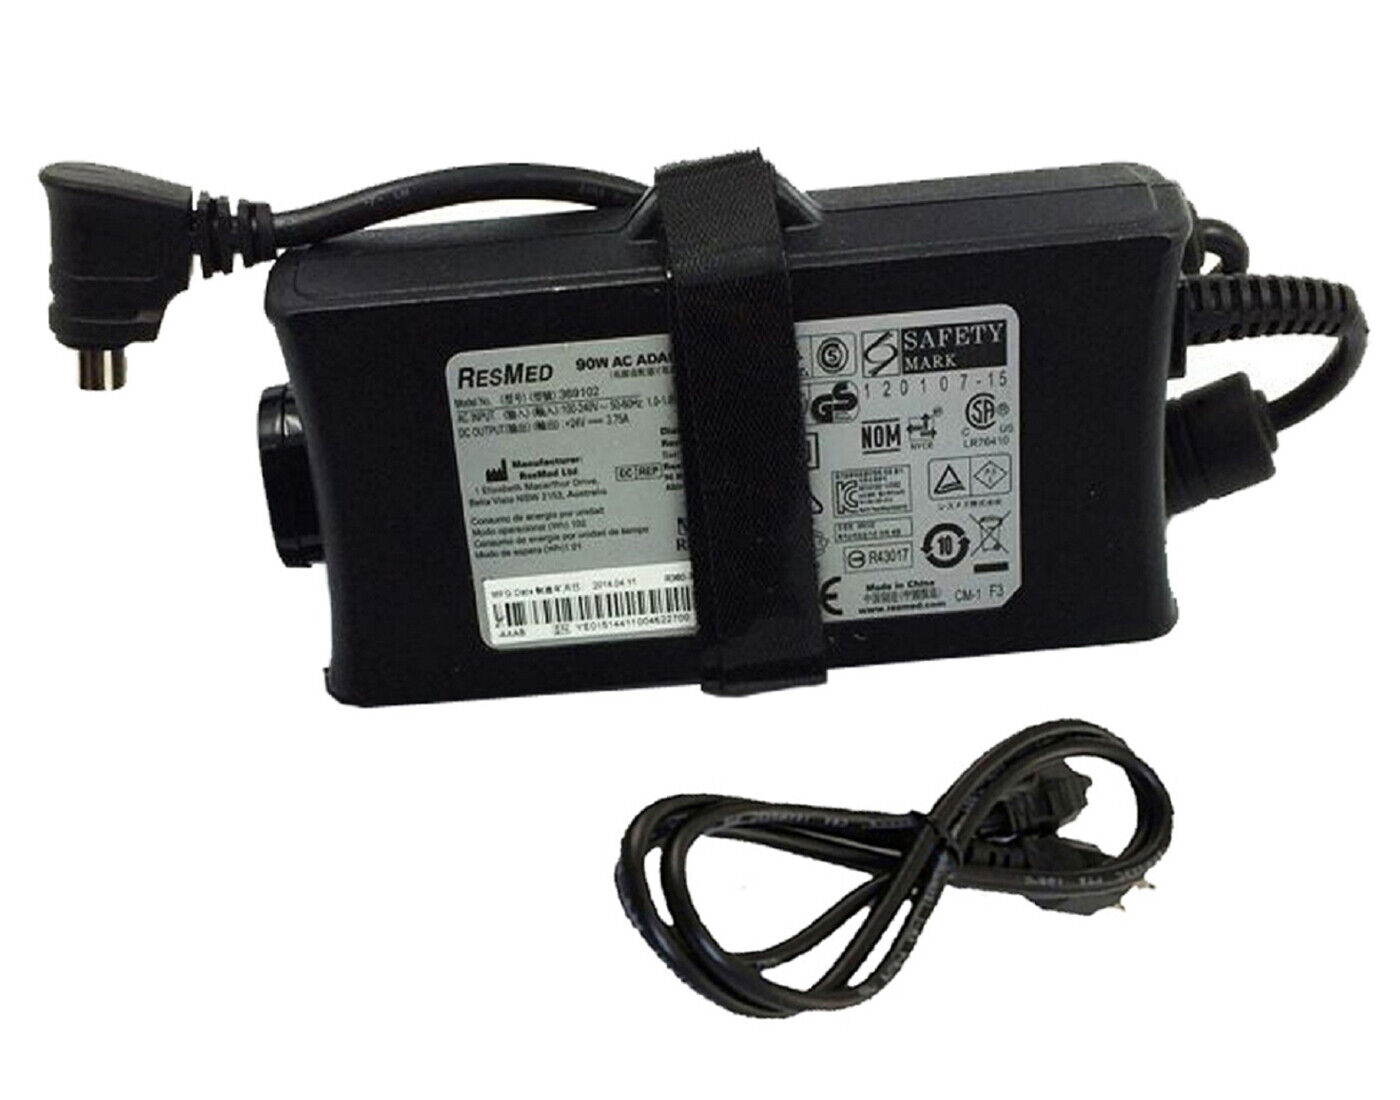 Genuine 3-Pin DIN 90W 24V 3.75A AC Adapter For Resmed S9 369102 S10 CPAP Machine Genuine Original OEM Resmed S9 369102